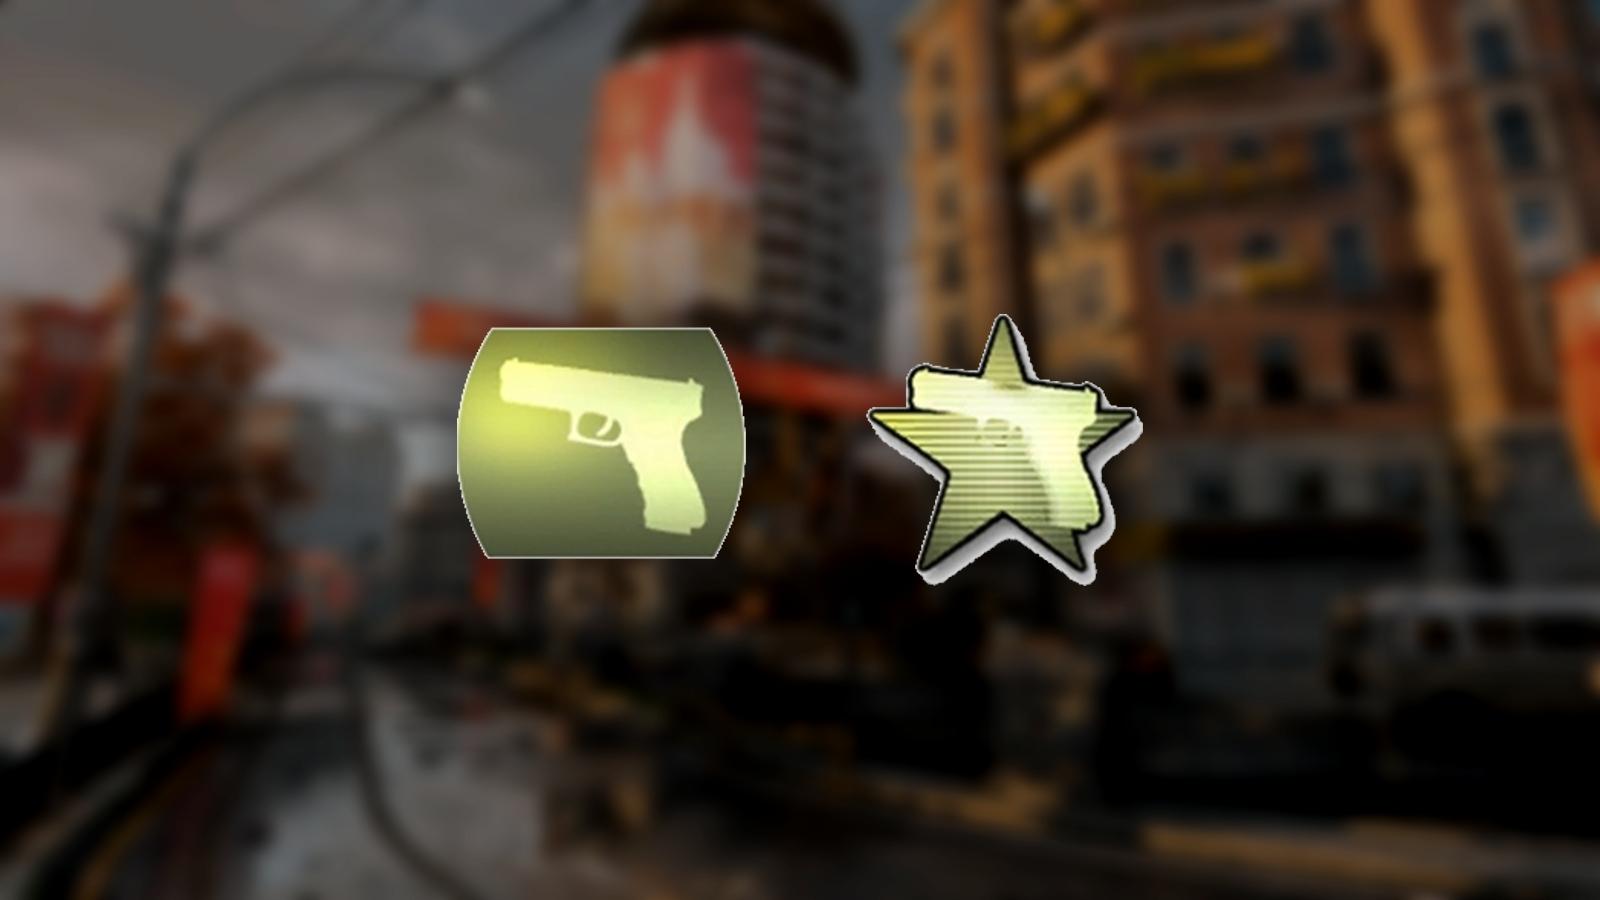 Last Stand perk logo with Moscow map inbackground